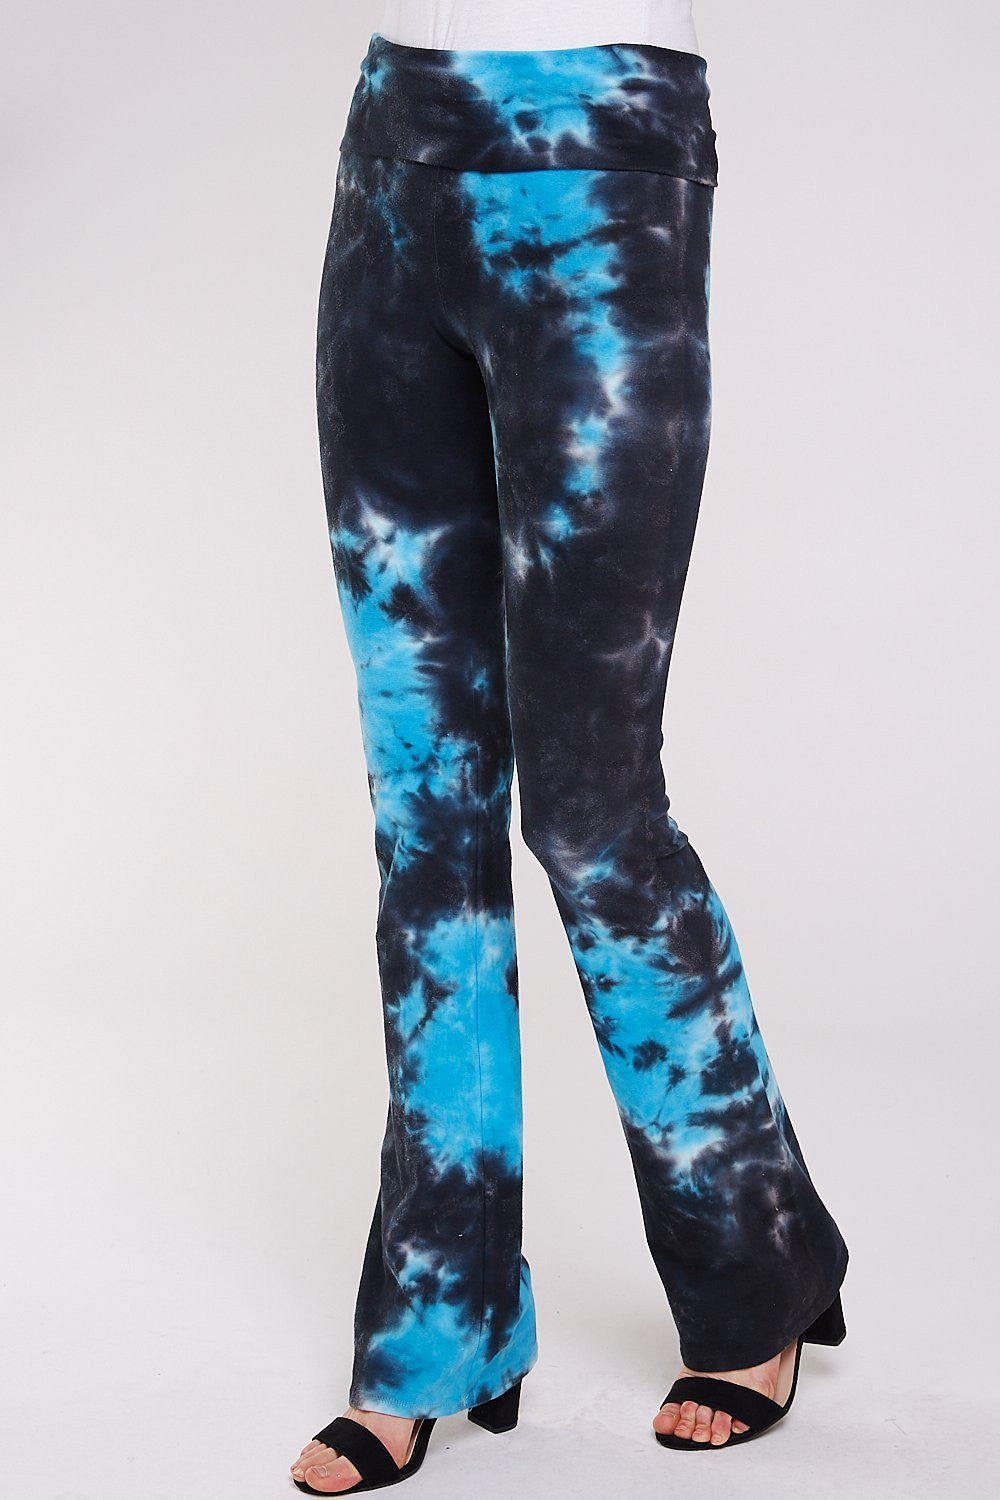 Unique Black & Turquoise Two tone Cloud tie dye yoga pants are perfect for any activity.